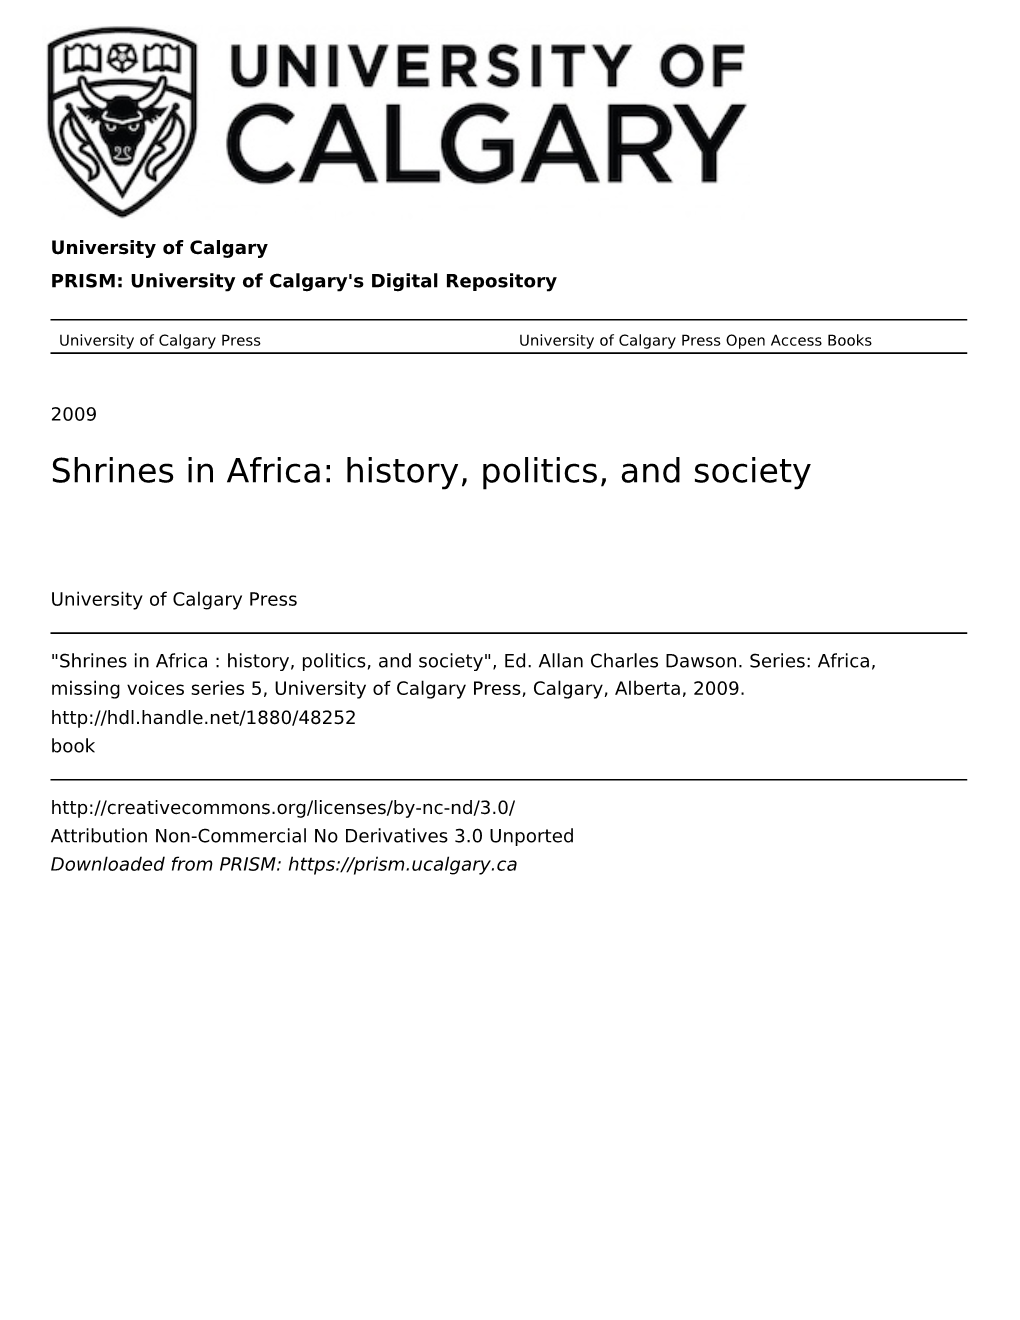 Shrines in Africa: History, Politics, and Society